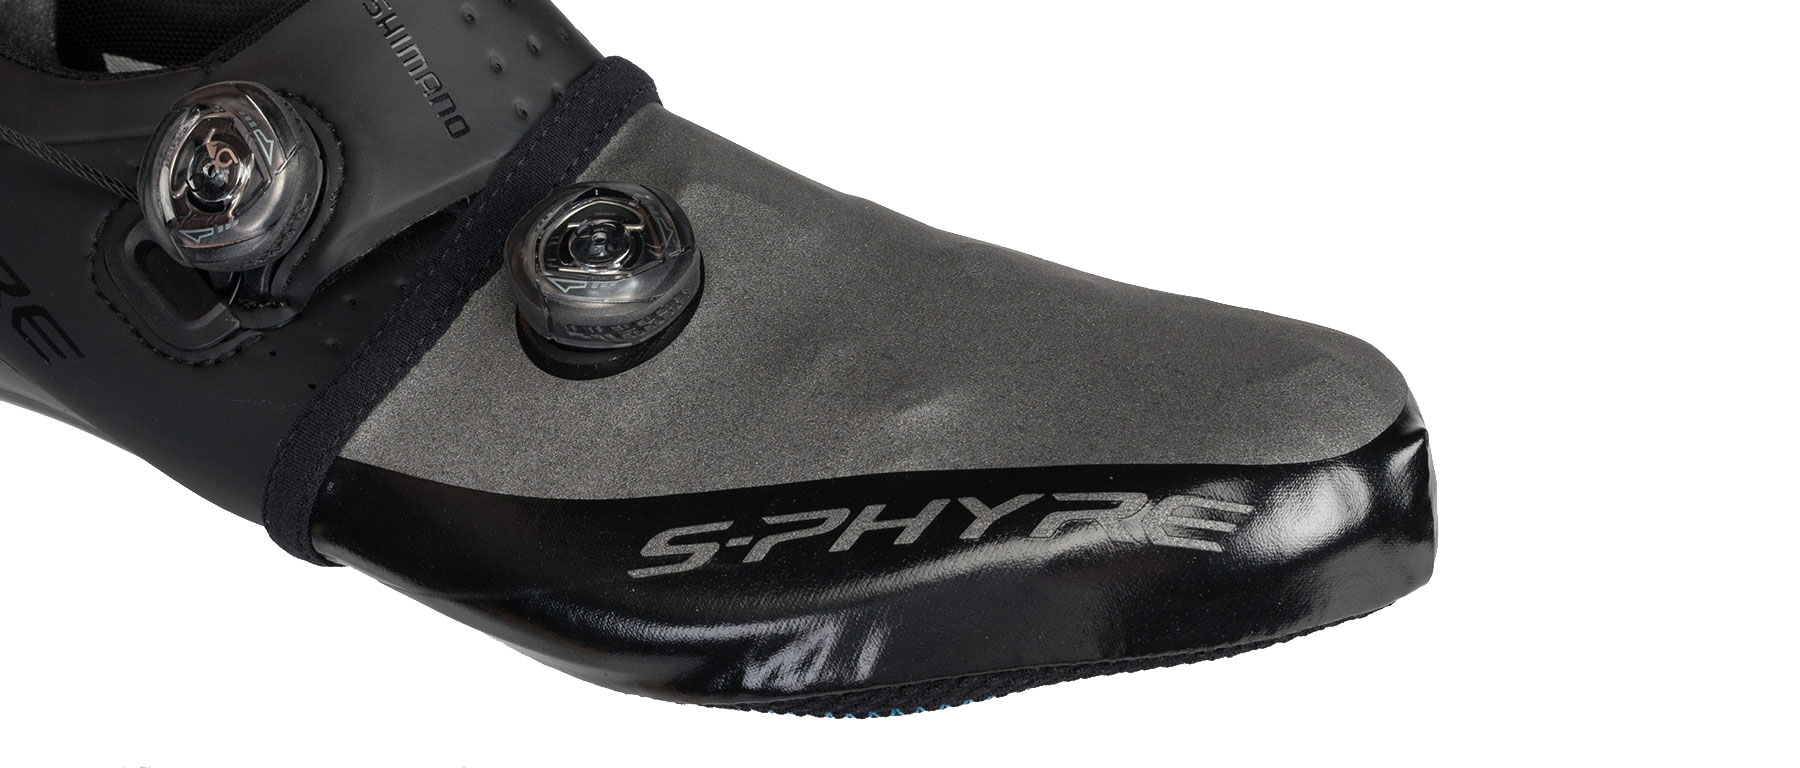 Shimano S-Phyre Toe Cover Excel Sports | Shop Online From Boulder Colorado